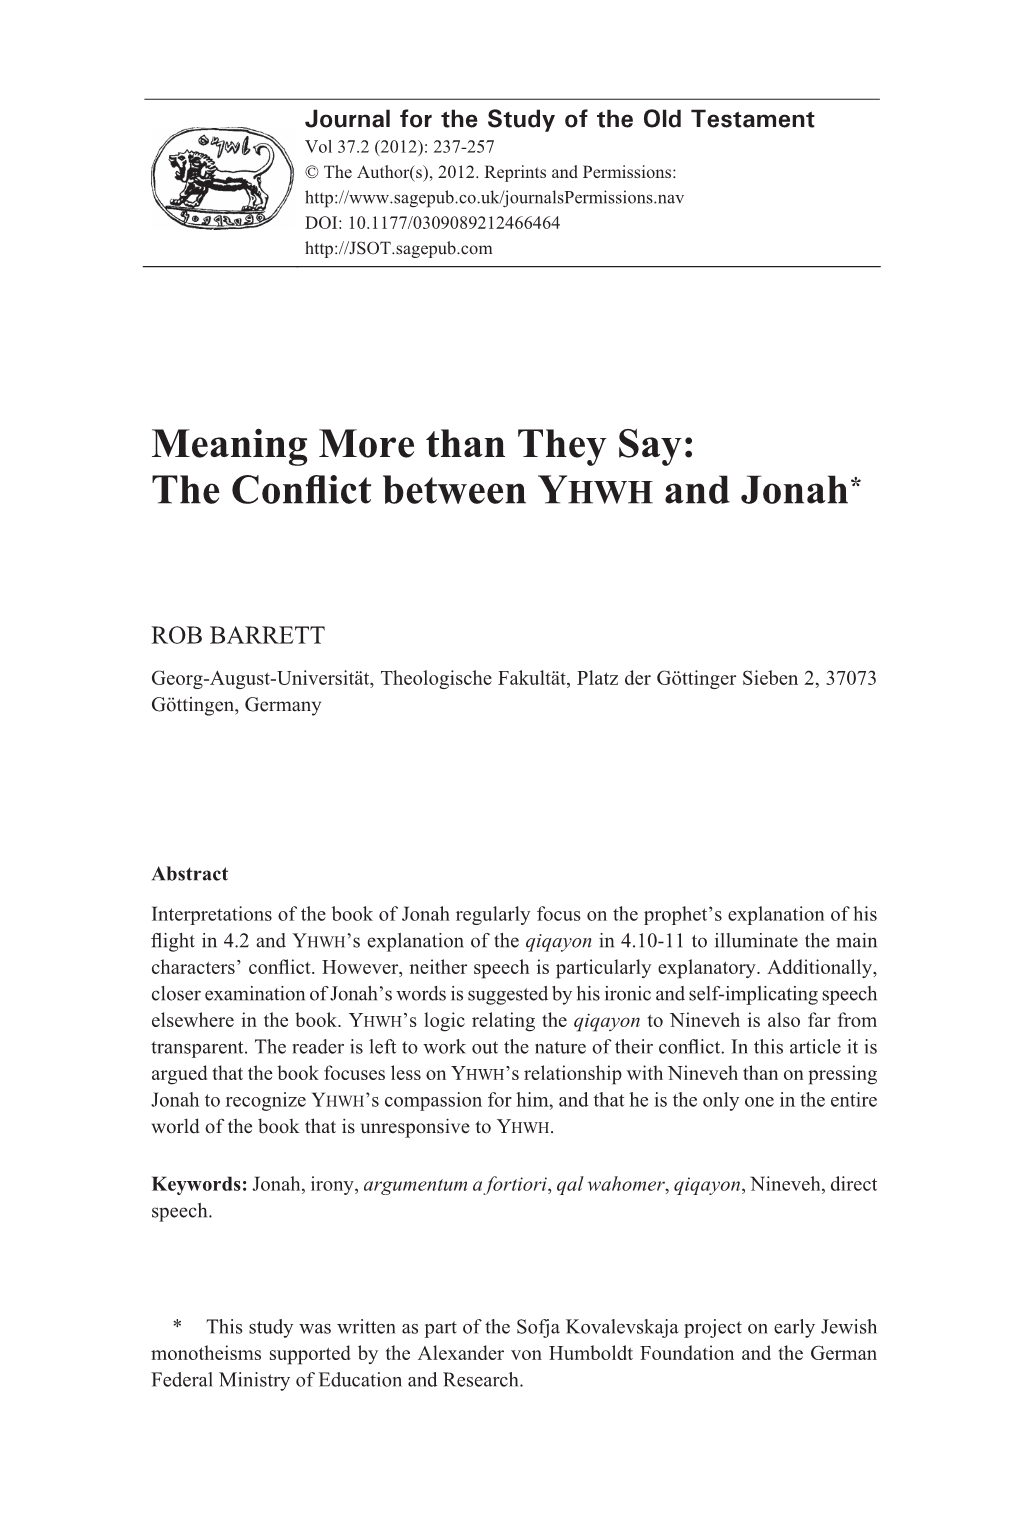 Meaning More Than They Say: the Conflict Between YHWH and Jonah*